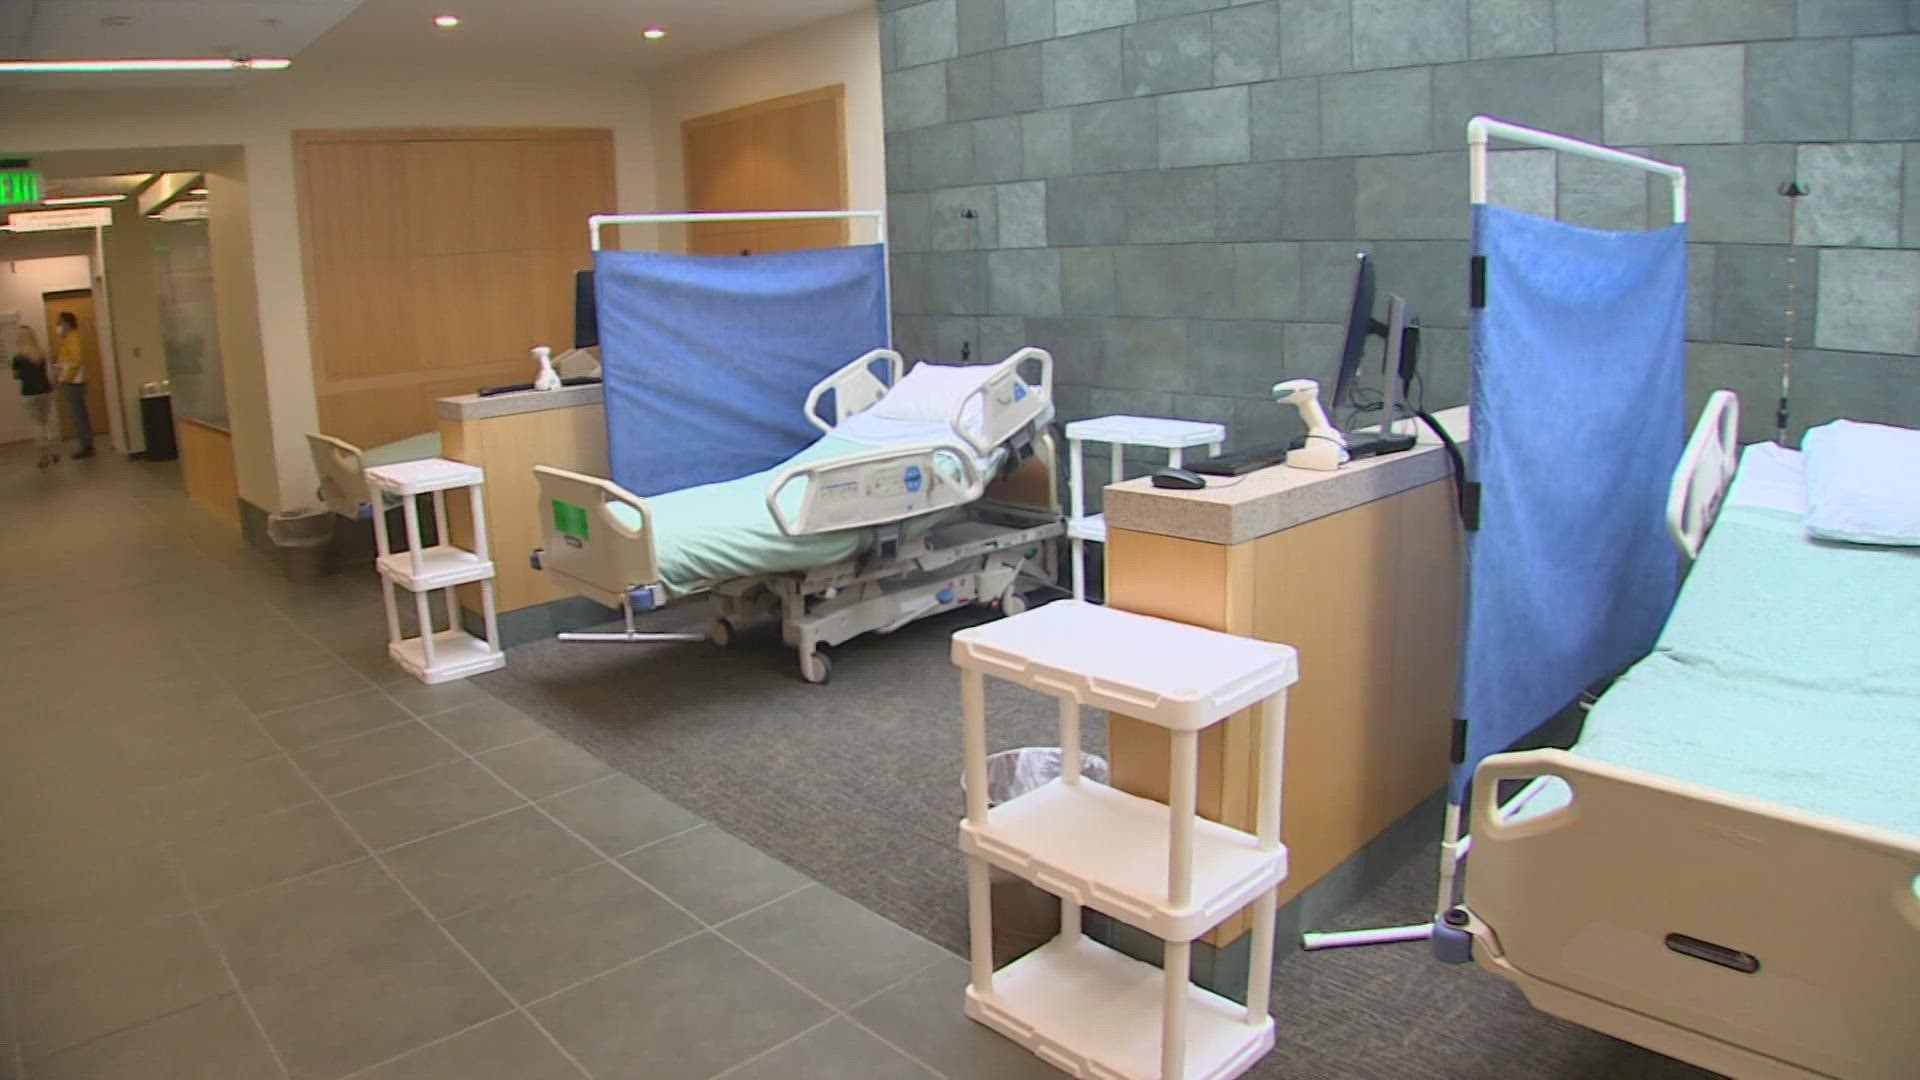 Providence St. Peter Hospital has set up hospital beds in rooms normally used for support groups and employee training to free up space for more COVID-19 patients.